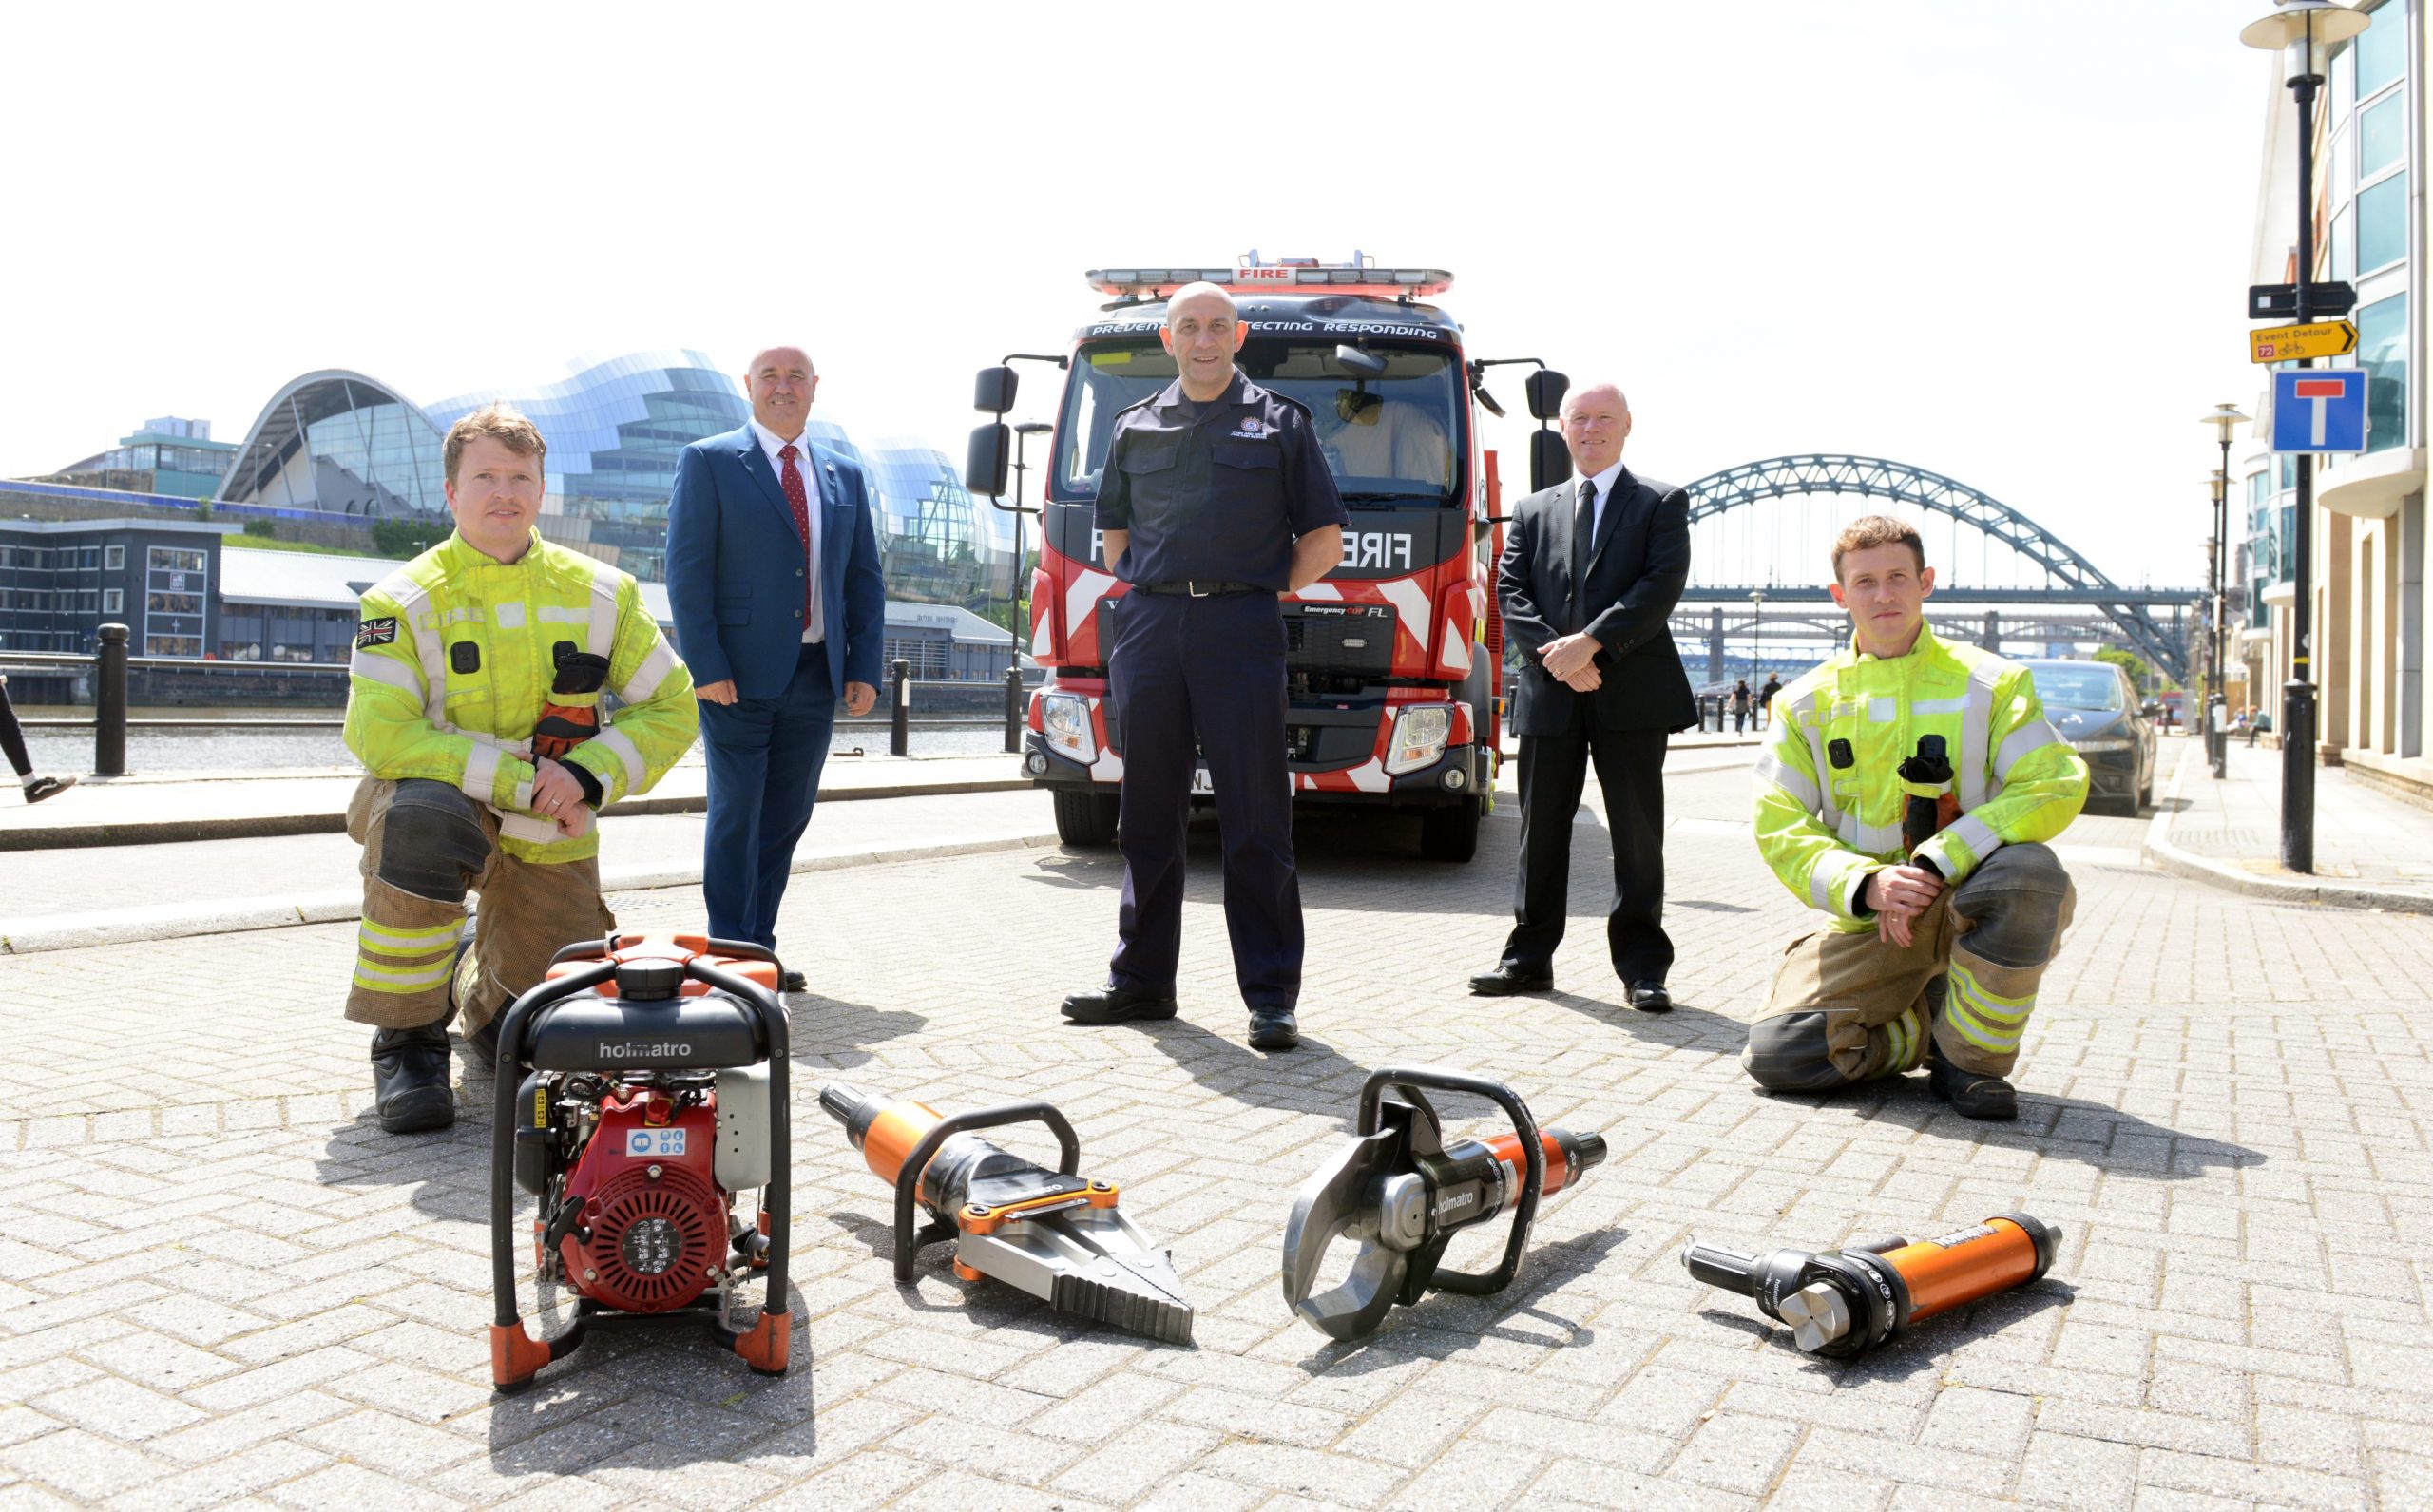 (back row left to right) Councillor Ged Bell of Newcastle City Council; (middle) DCFO Peter Heath of TWFRS; Councillor Kevin Dodds, Gateshead councillor and member of the Tyne and Wear Fire and Rescue Authority. 

(Front row) TWFRS firefighters Philip Johnson & Scott Elliott 

All pictured on Newcastle Quayside where the UKRO event will be taking place in September.